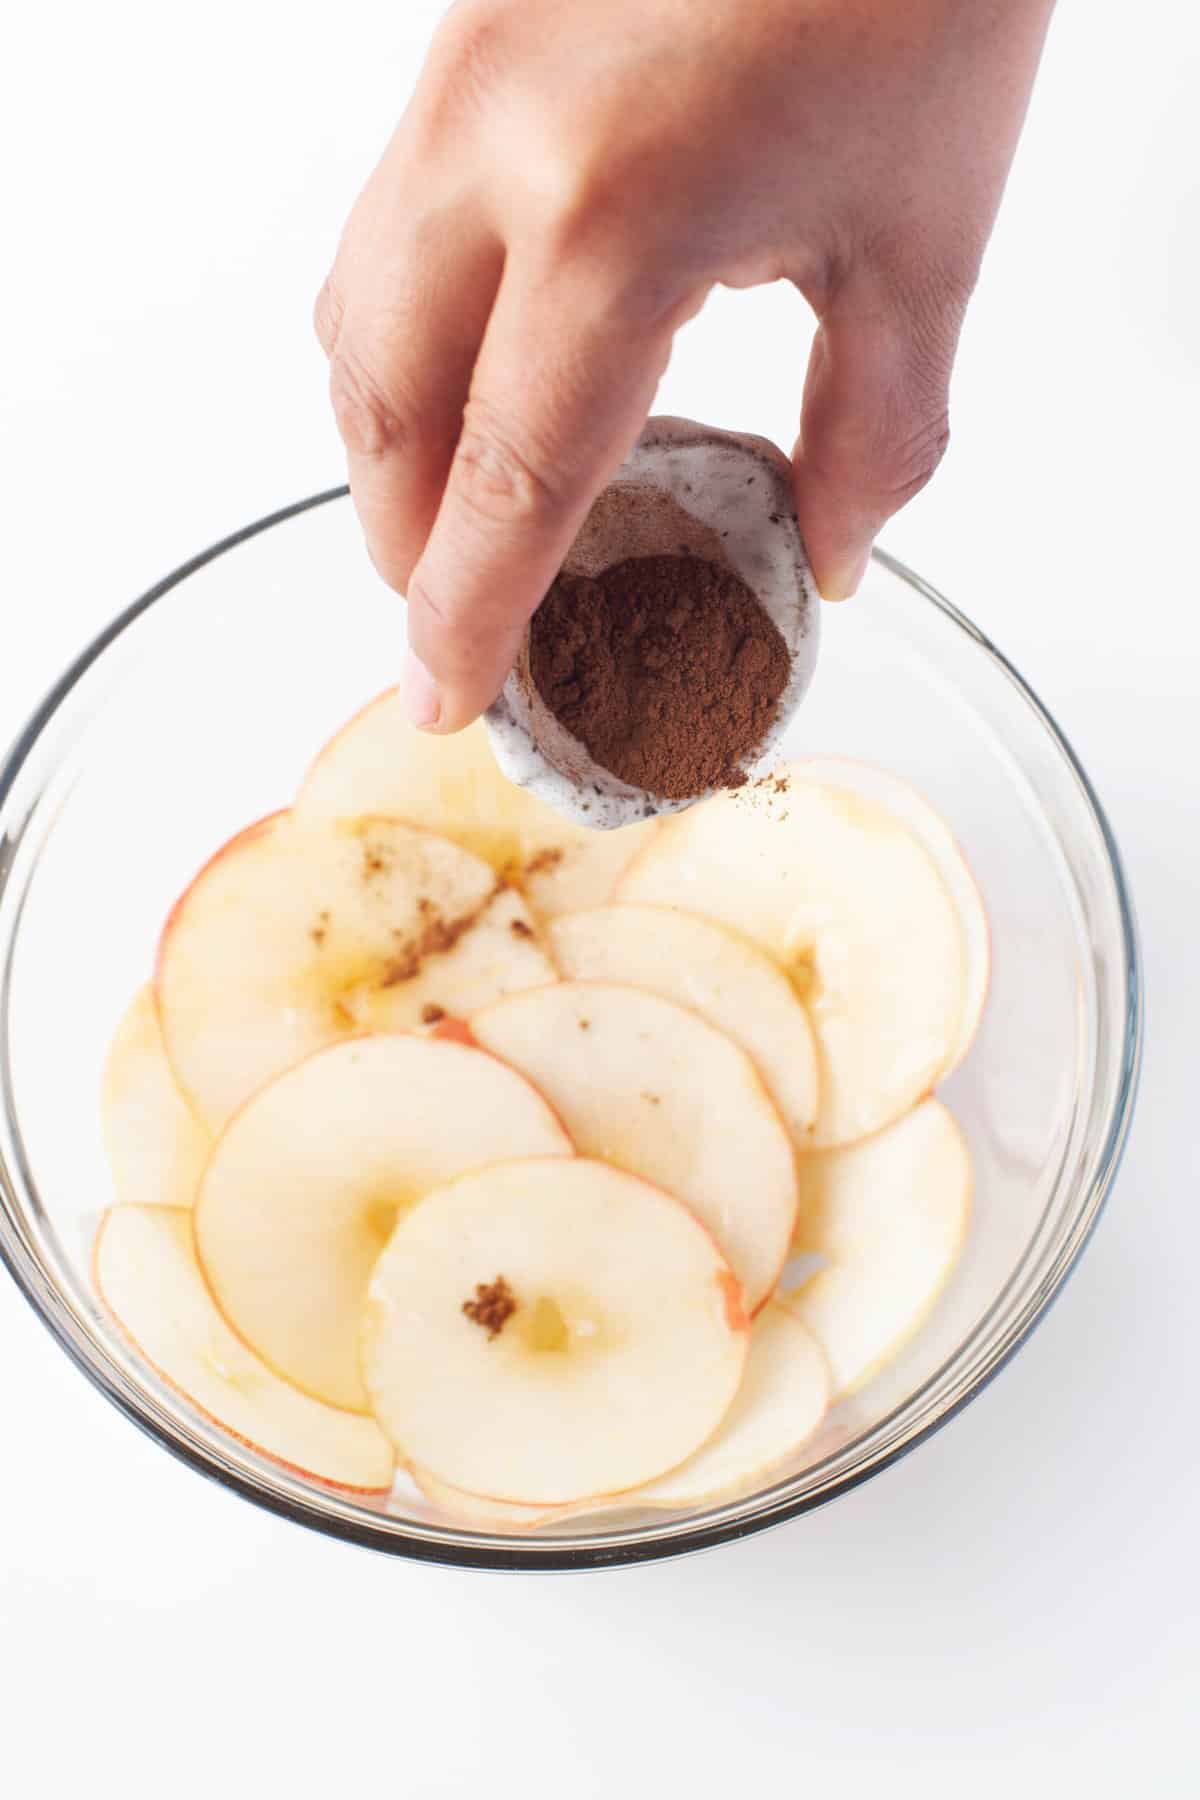 Sprinkling thinly sliced apples with ground cinnamon and nutmeg.